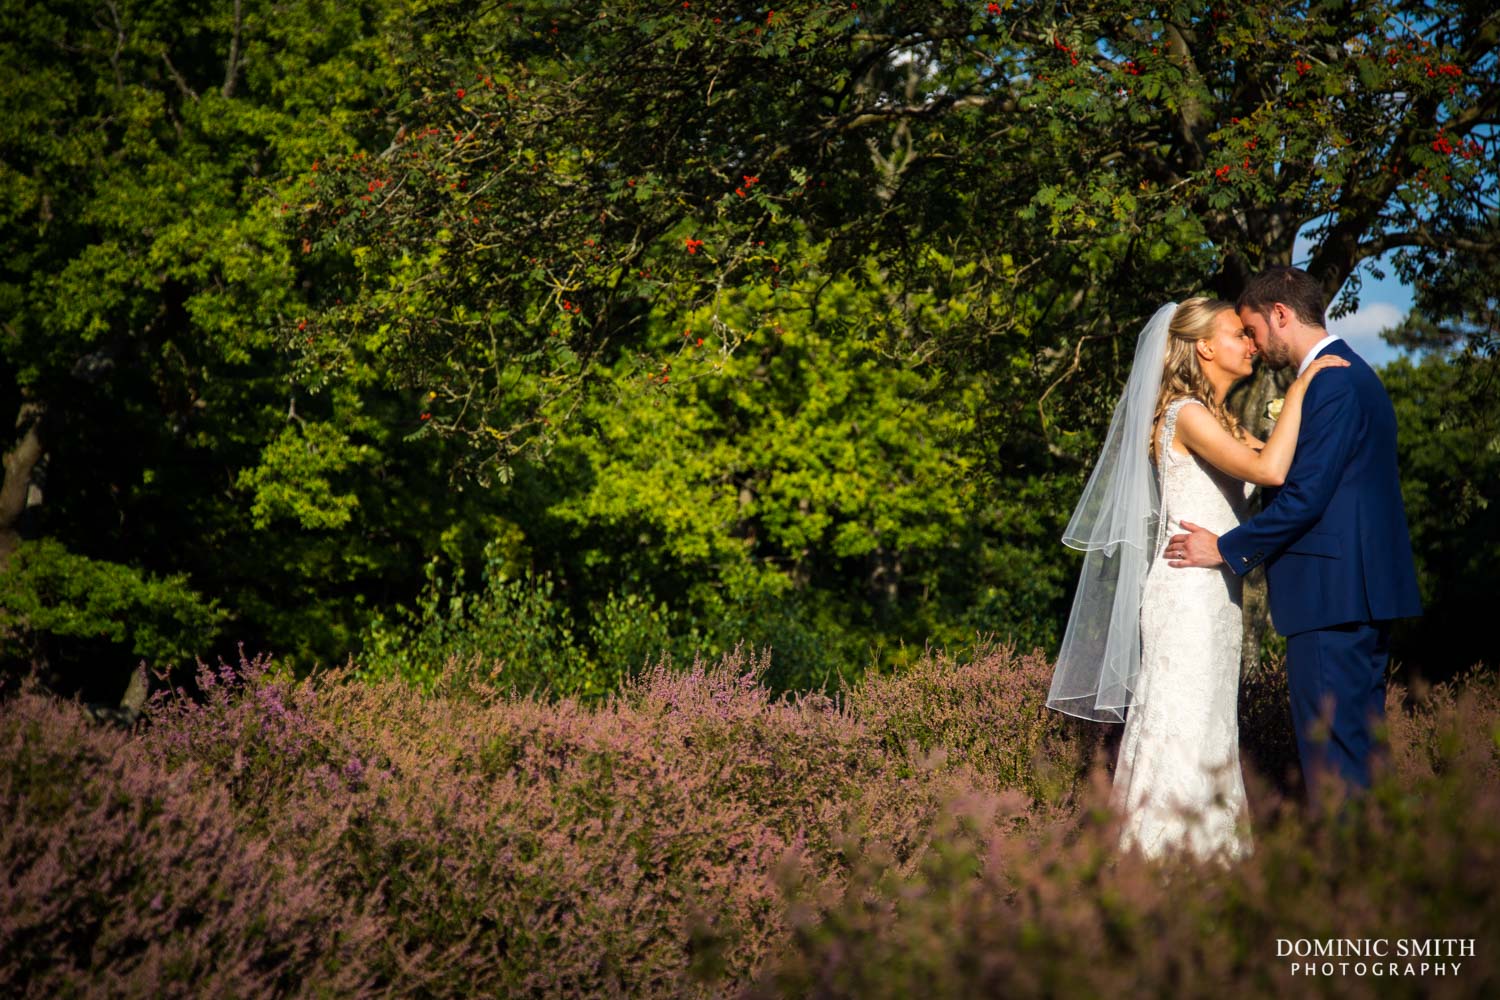 Wedding of Sophie and Simon at Croham Hurst Woods